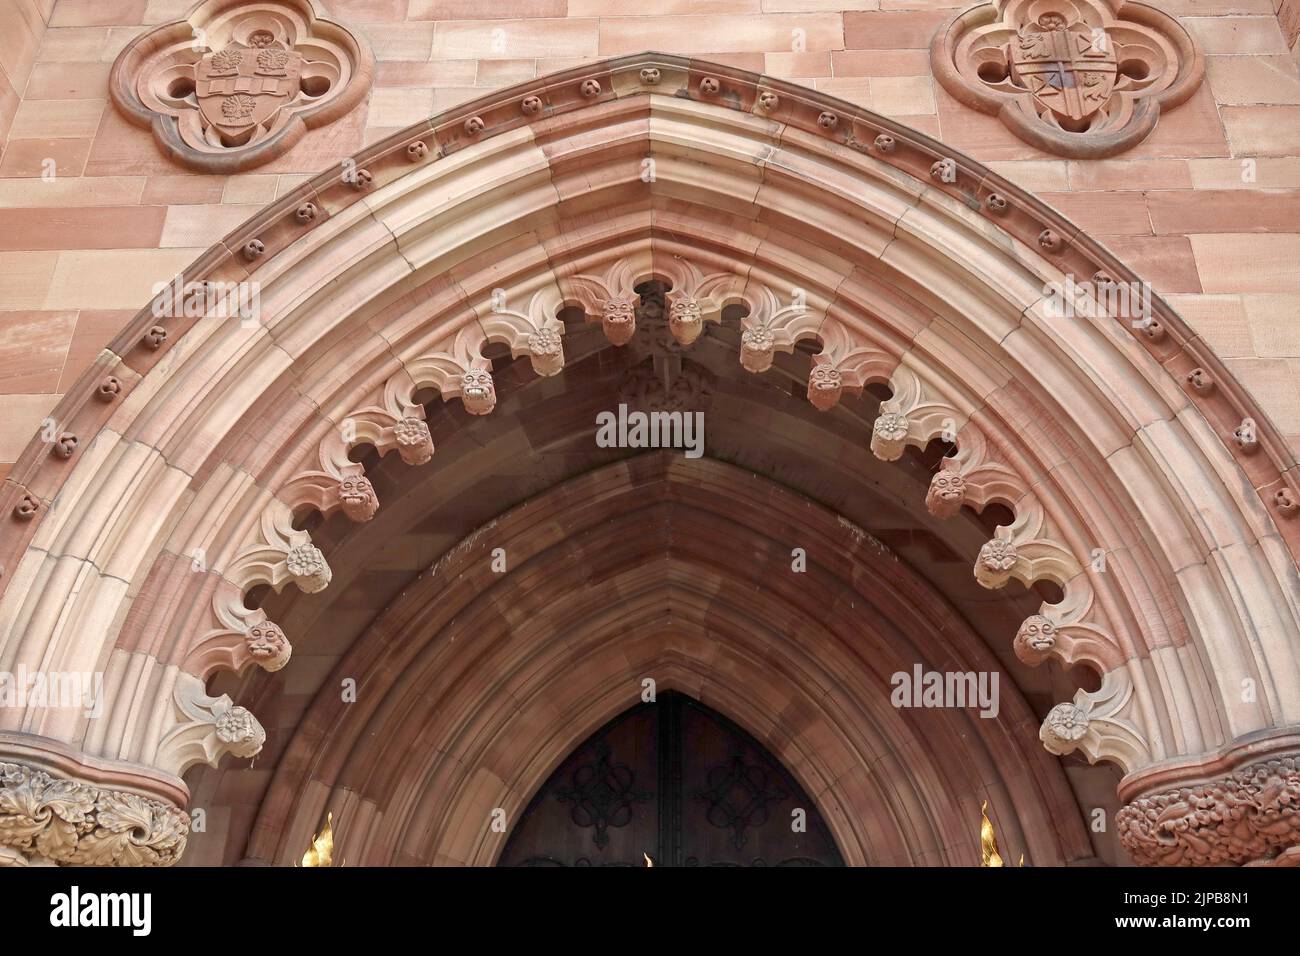 Hereford Cathedral details, Hereford City Centre, Herefordshire, England, UK, HR1 2NG Foto Stock